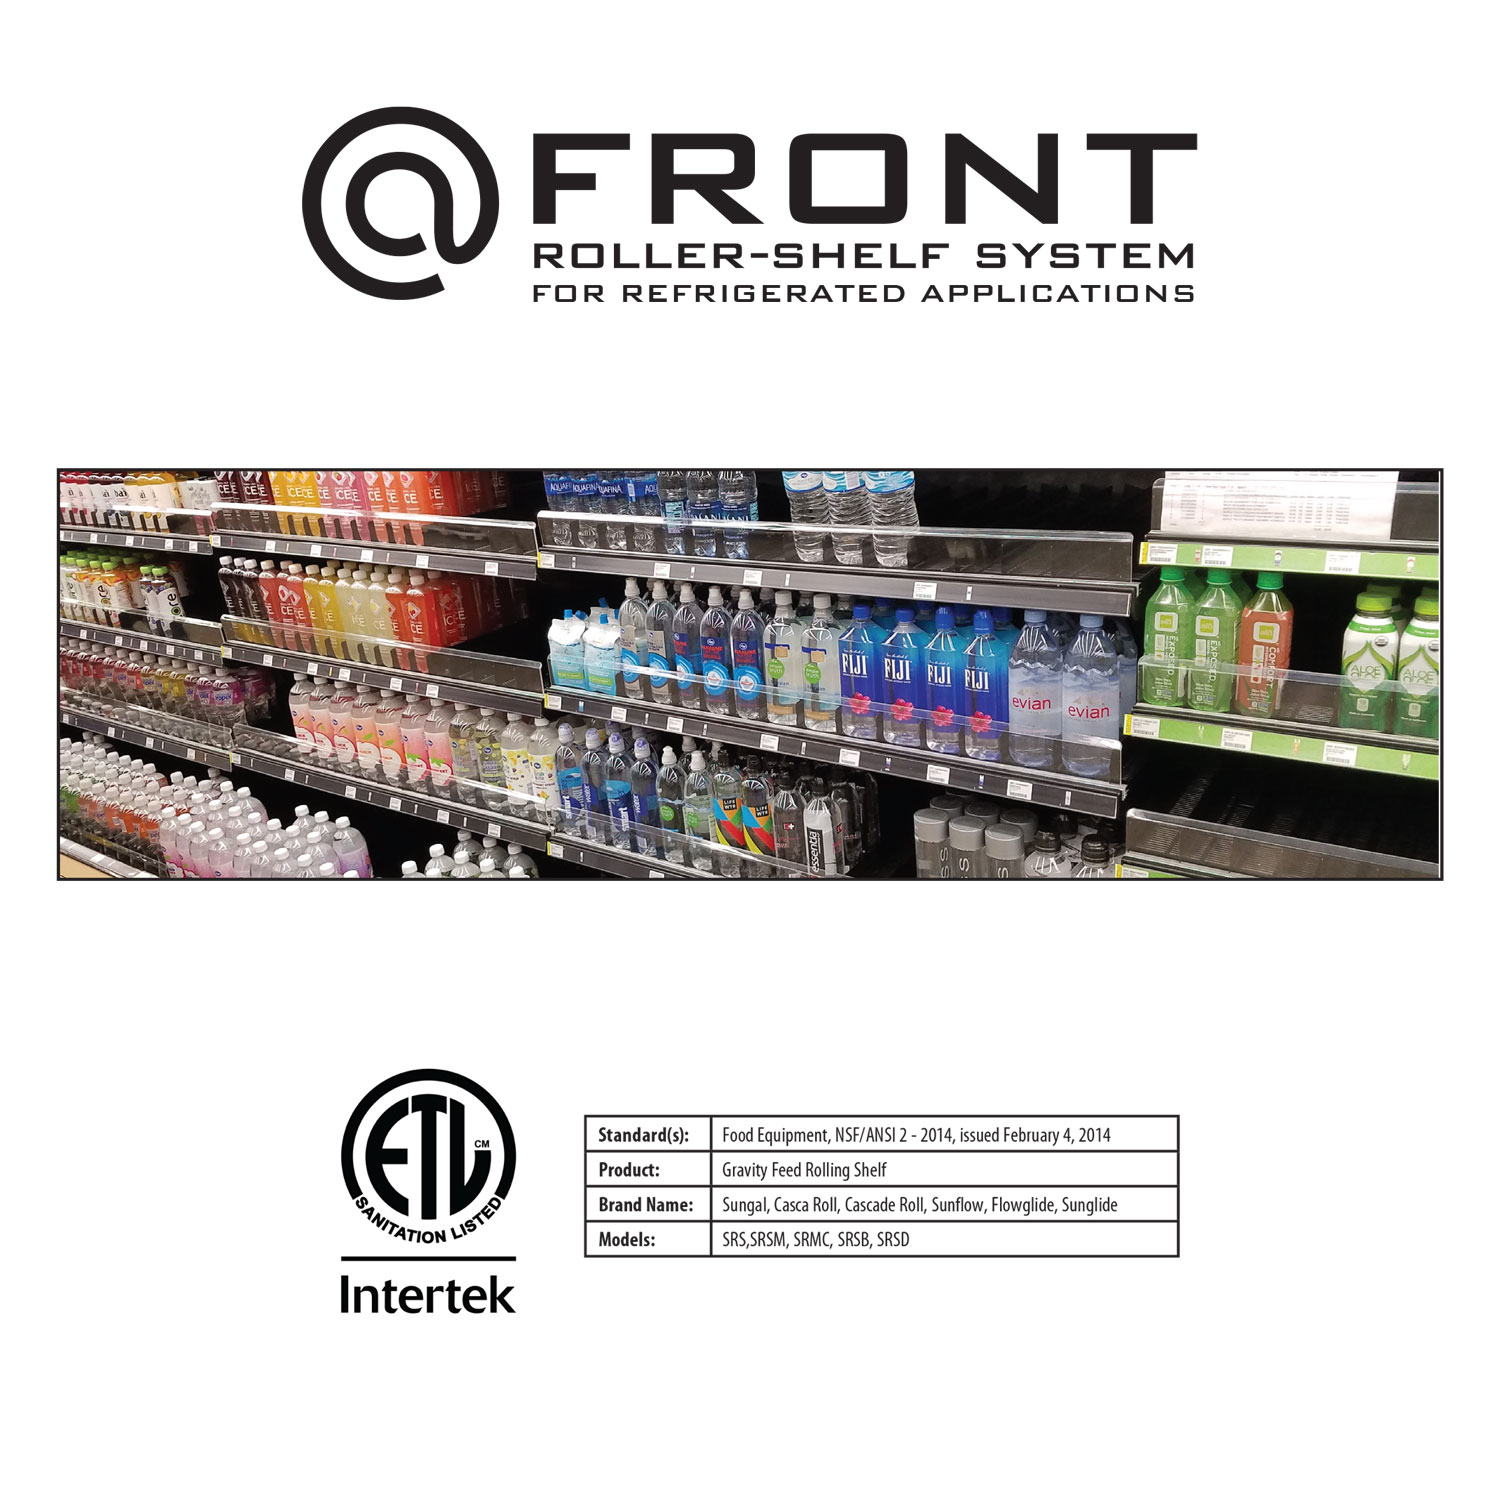 AtFront for Refrigerated Applications